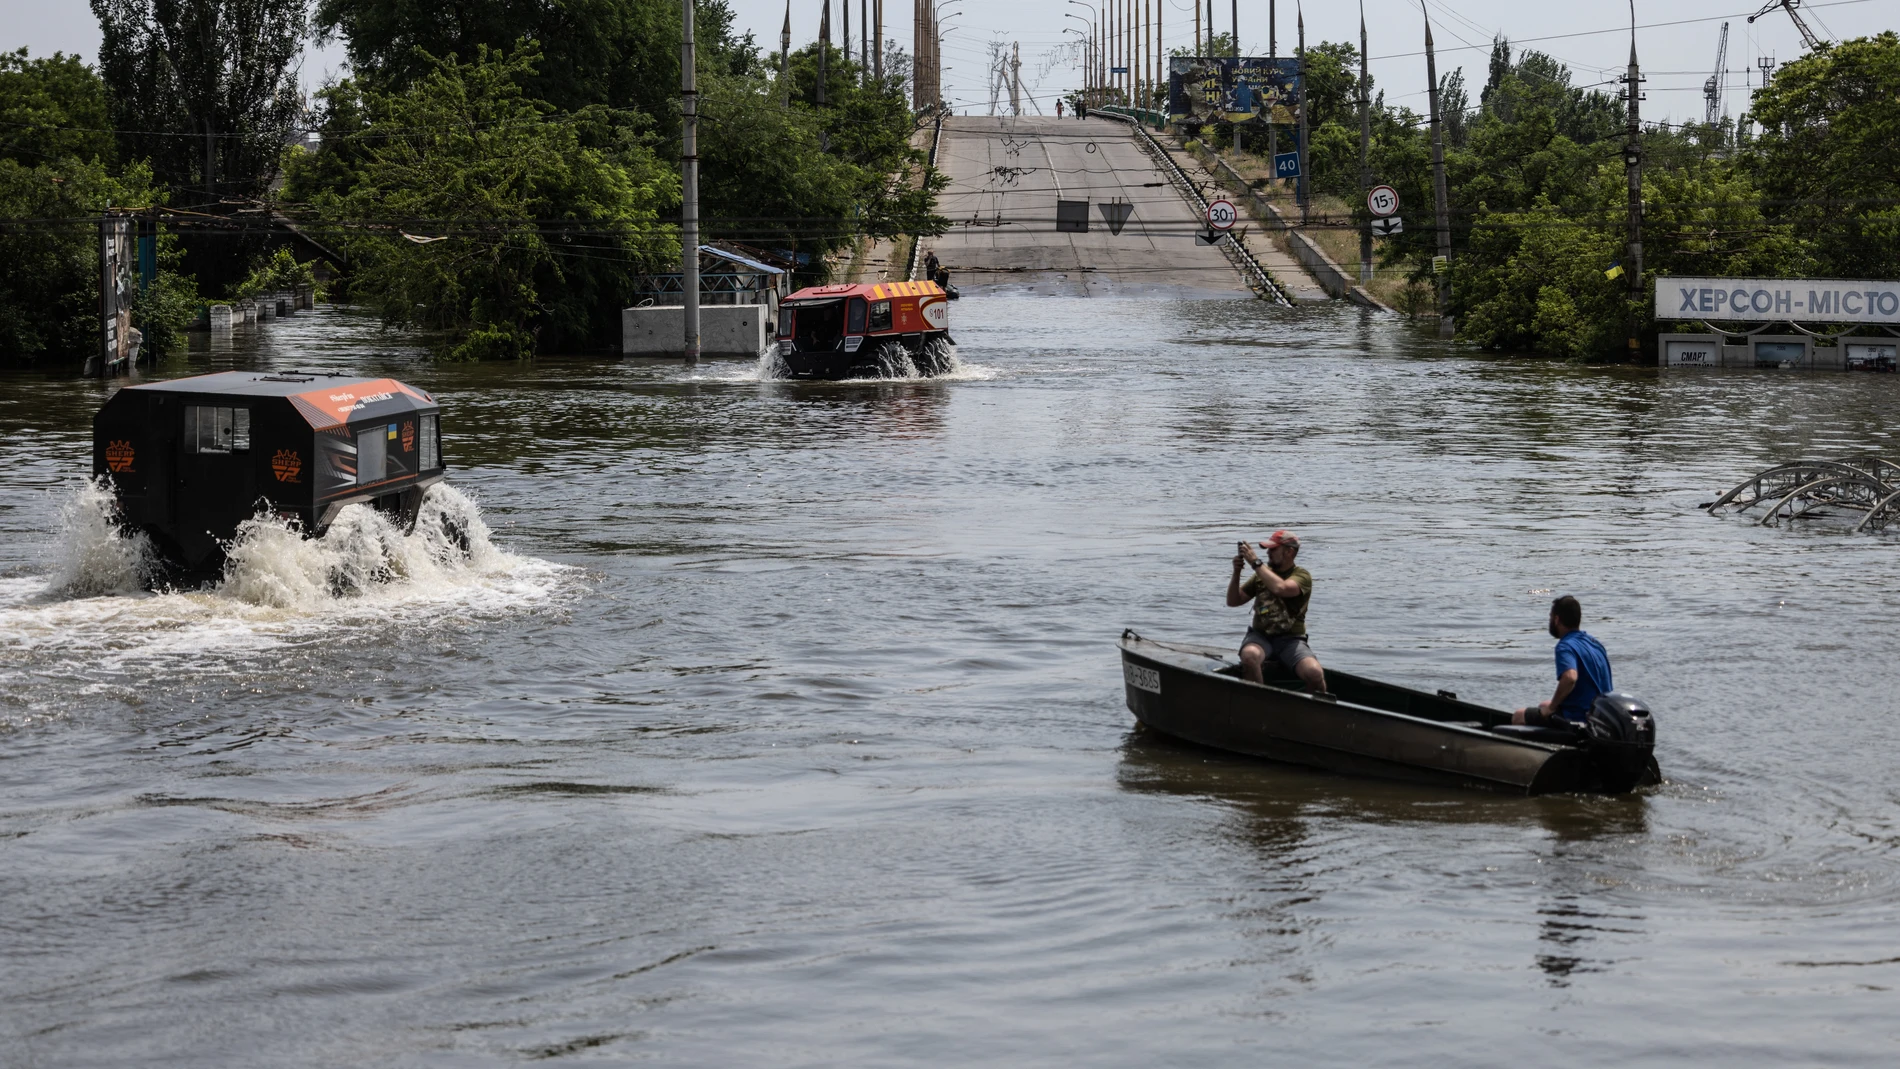 Kherson (Ukraine), 08/06/2023.- Rescue workers move through a flooded square on an Amphibious ATV (L) in Kherson, Ukraine, 08 June 2023, amid the Russian invasion. Ukraine has accused Russian forces of destroying a critical dam and hydroelectric power plant on the Dnipro River in the Kherson region along the front line in southern Ukraine on 06 June, leading to the flooding of a number of settlements. (Inundaciones, Rusia, Ucrania) EFE/EPA/STAS KOZLIUK 